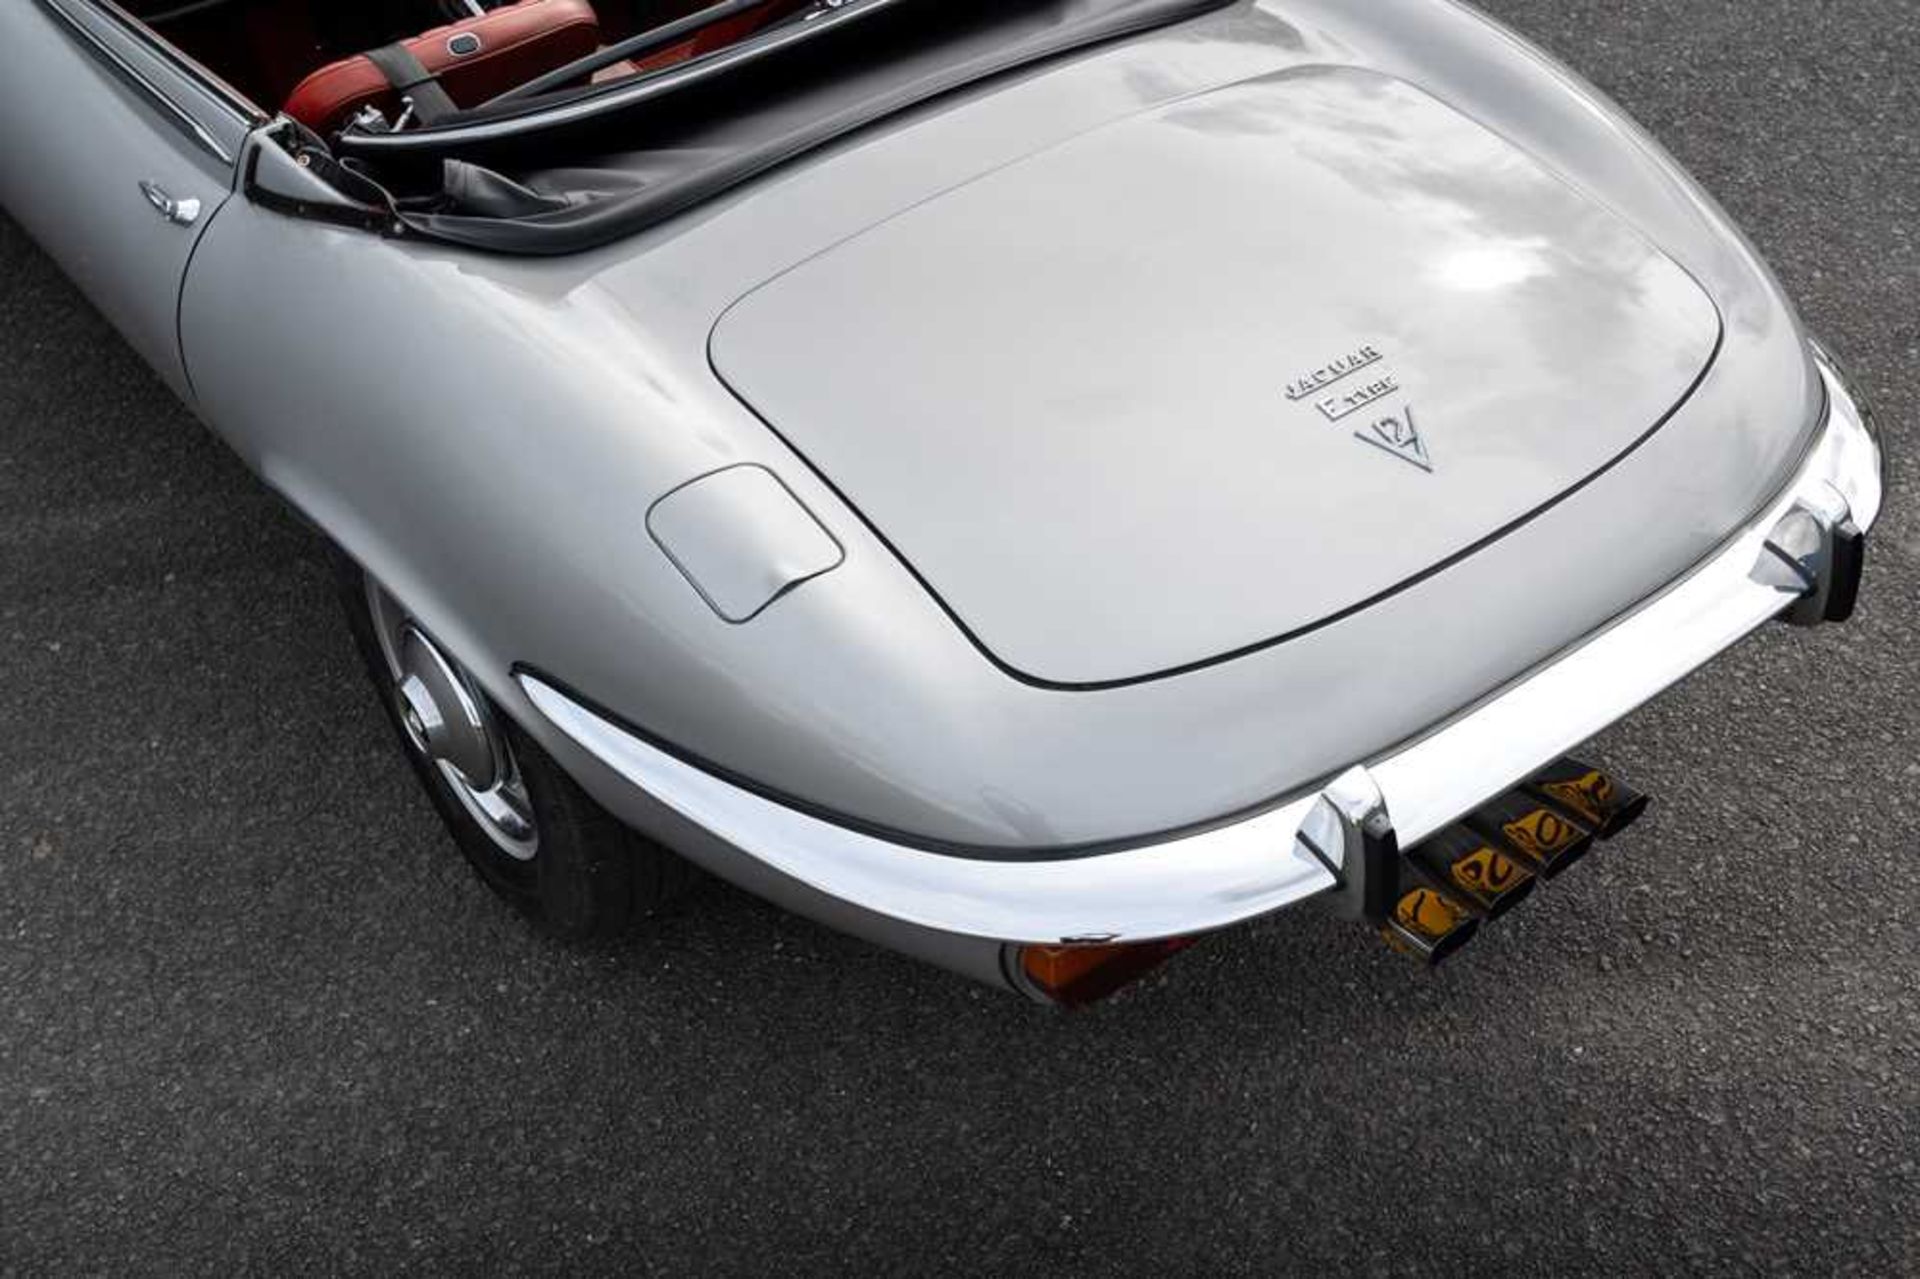 1974 Jaguar E-Type Series III V12 Roadster Only one family owner and 54,412 miles from new - Image 70 of 89